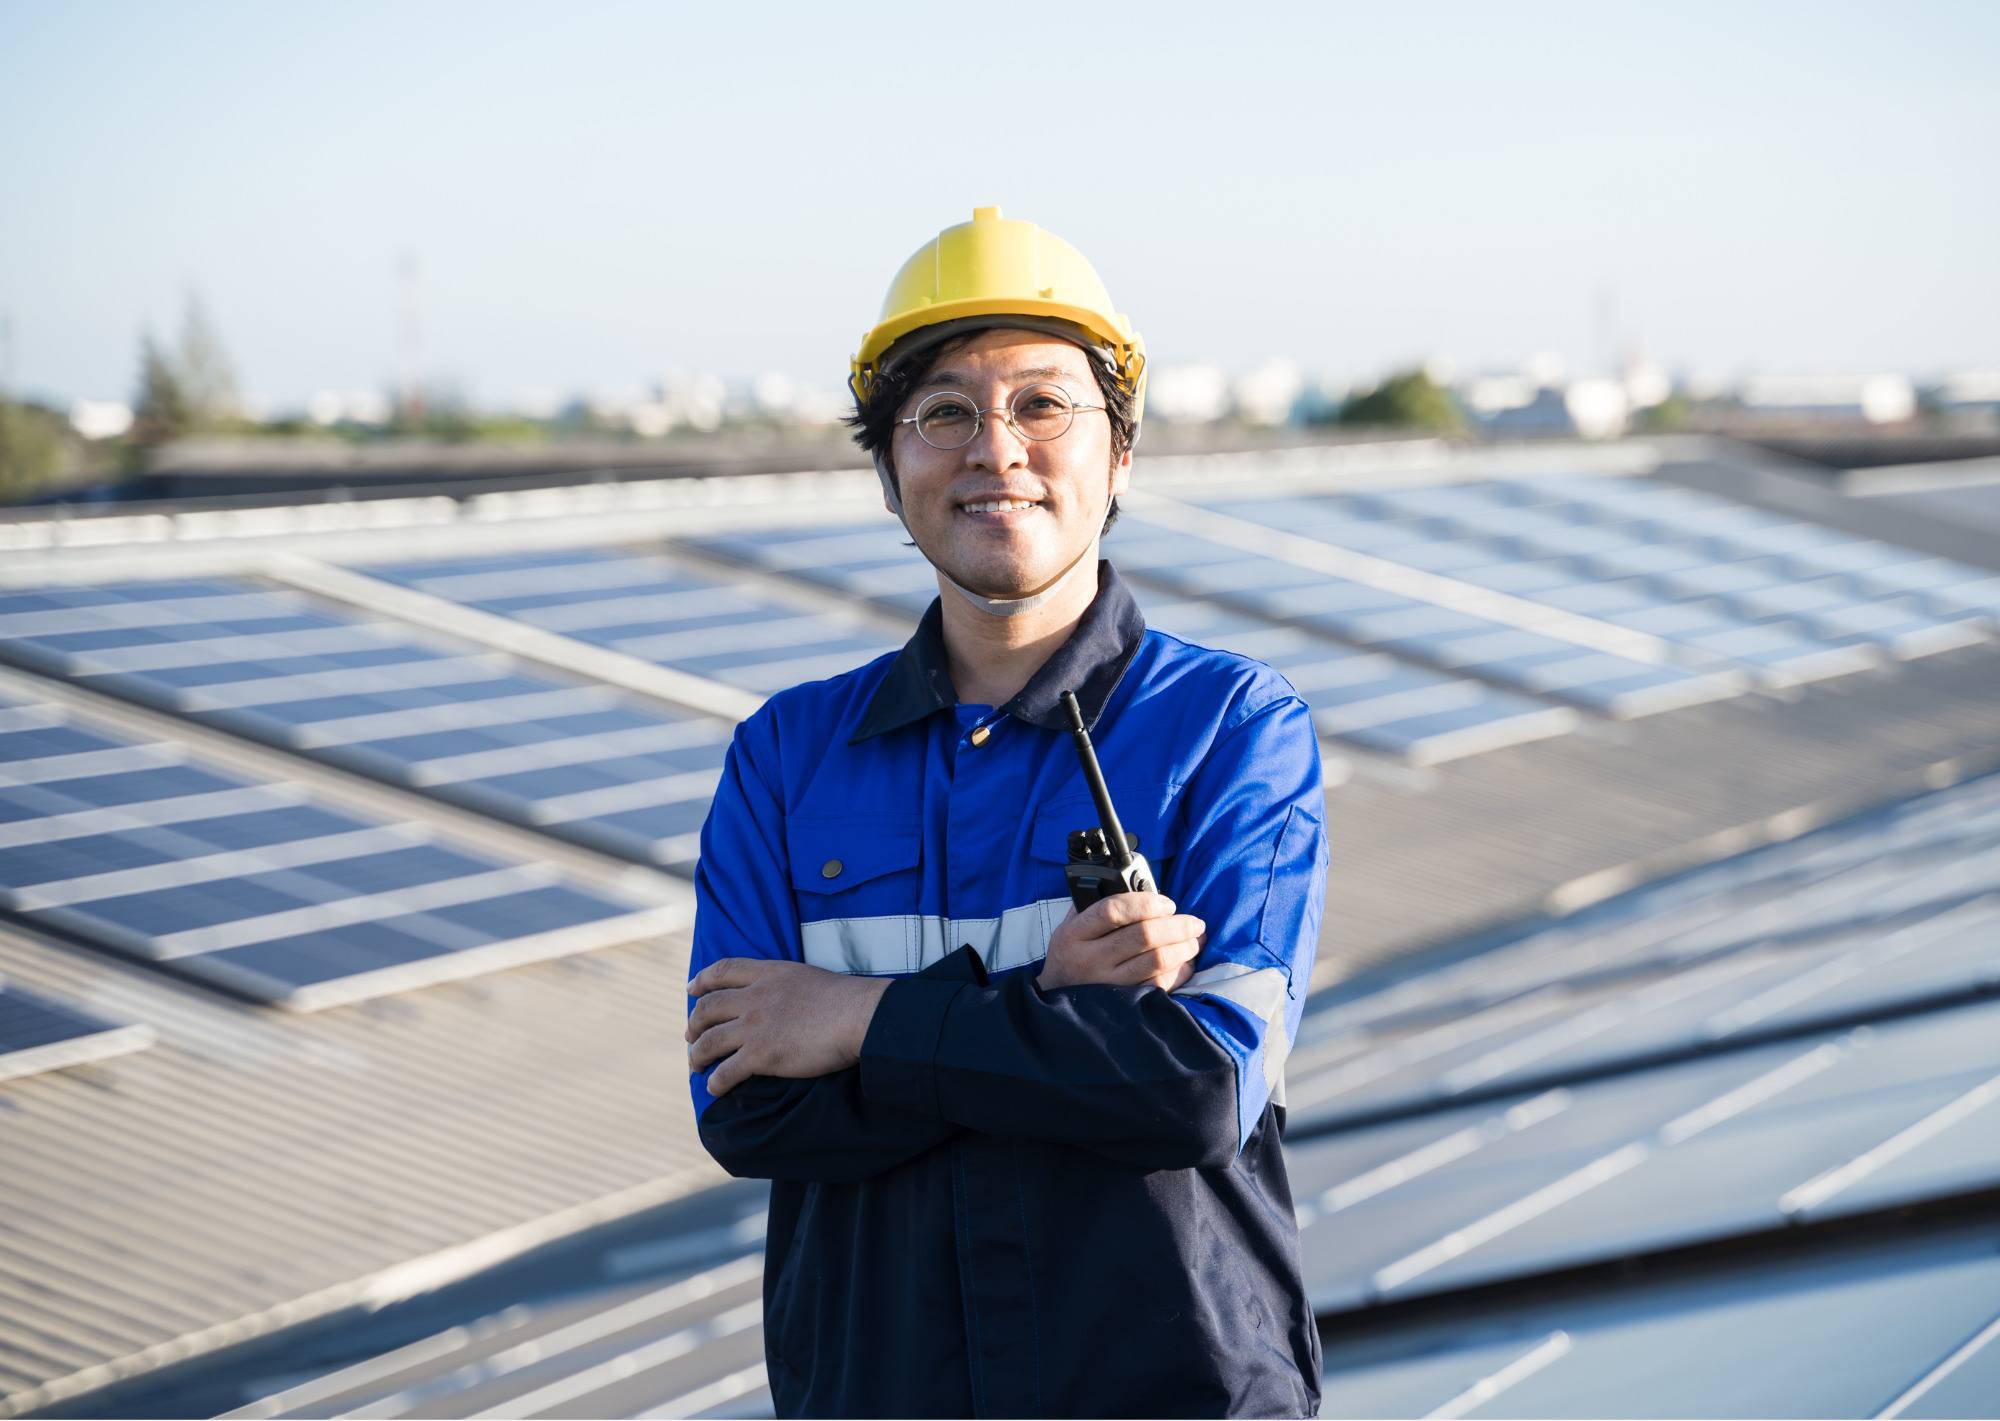 How do I get a Job in the Renewable Energy Sector